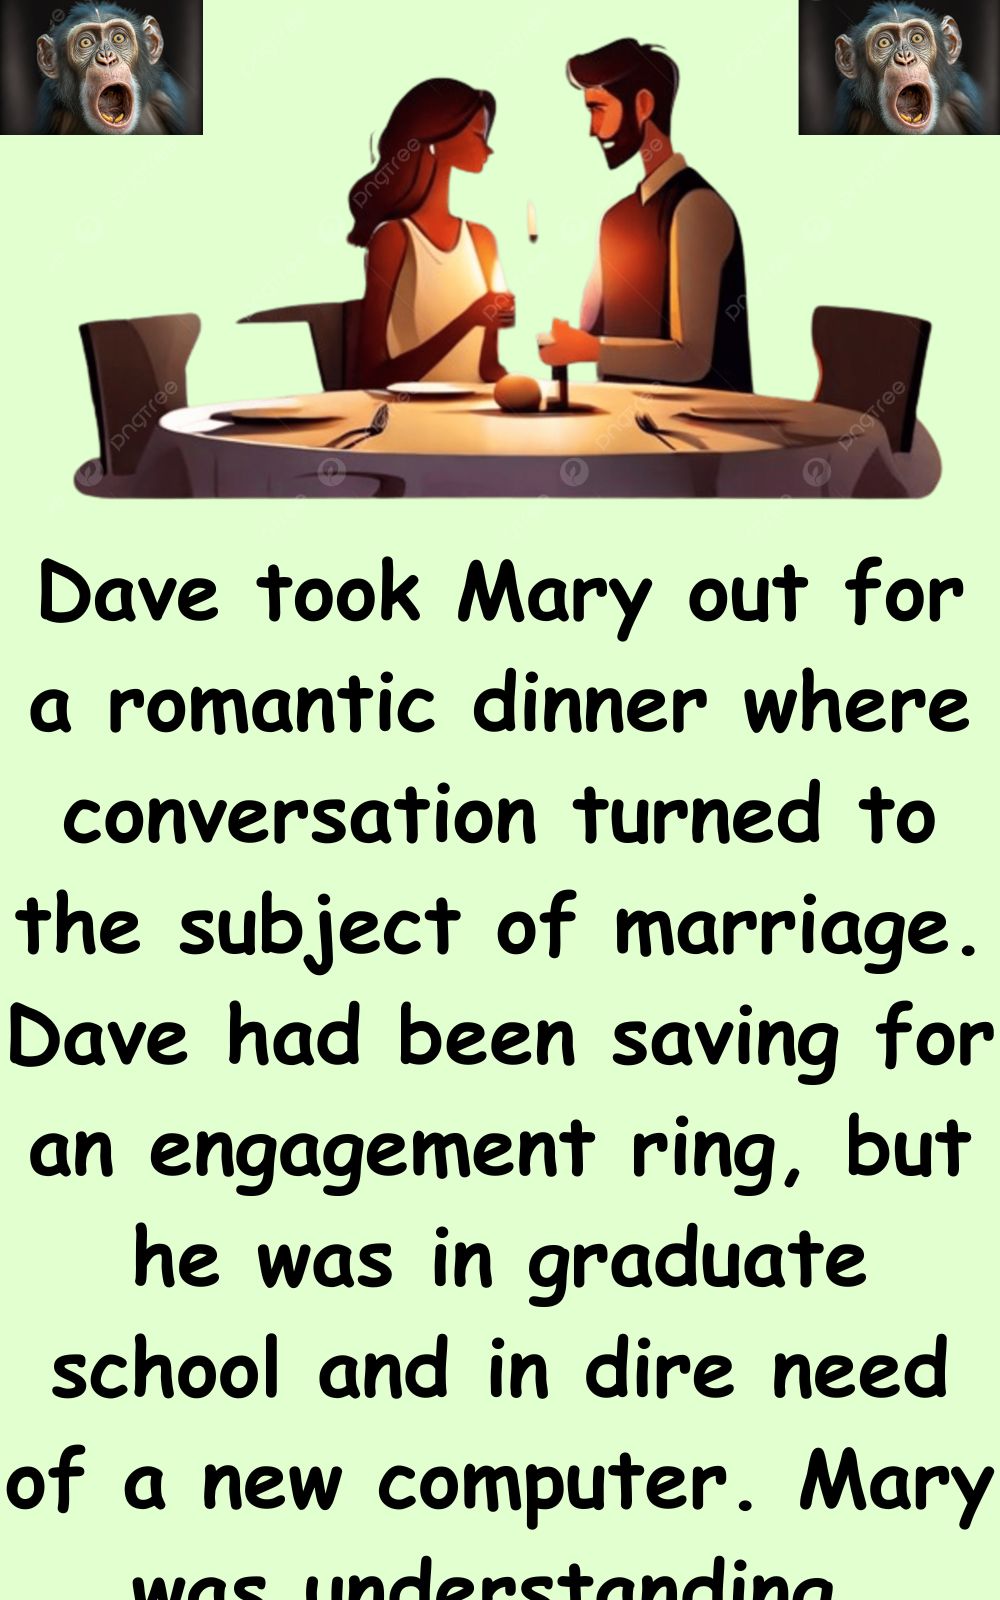 Dave took Mary out for a romantic dinner